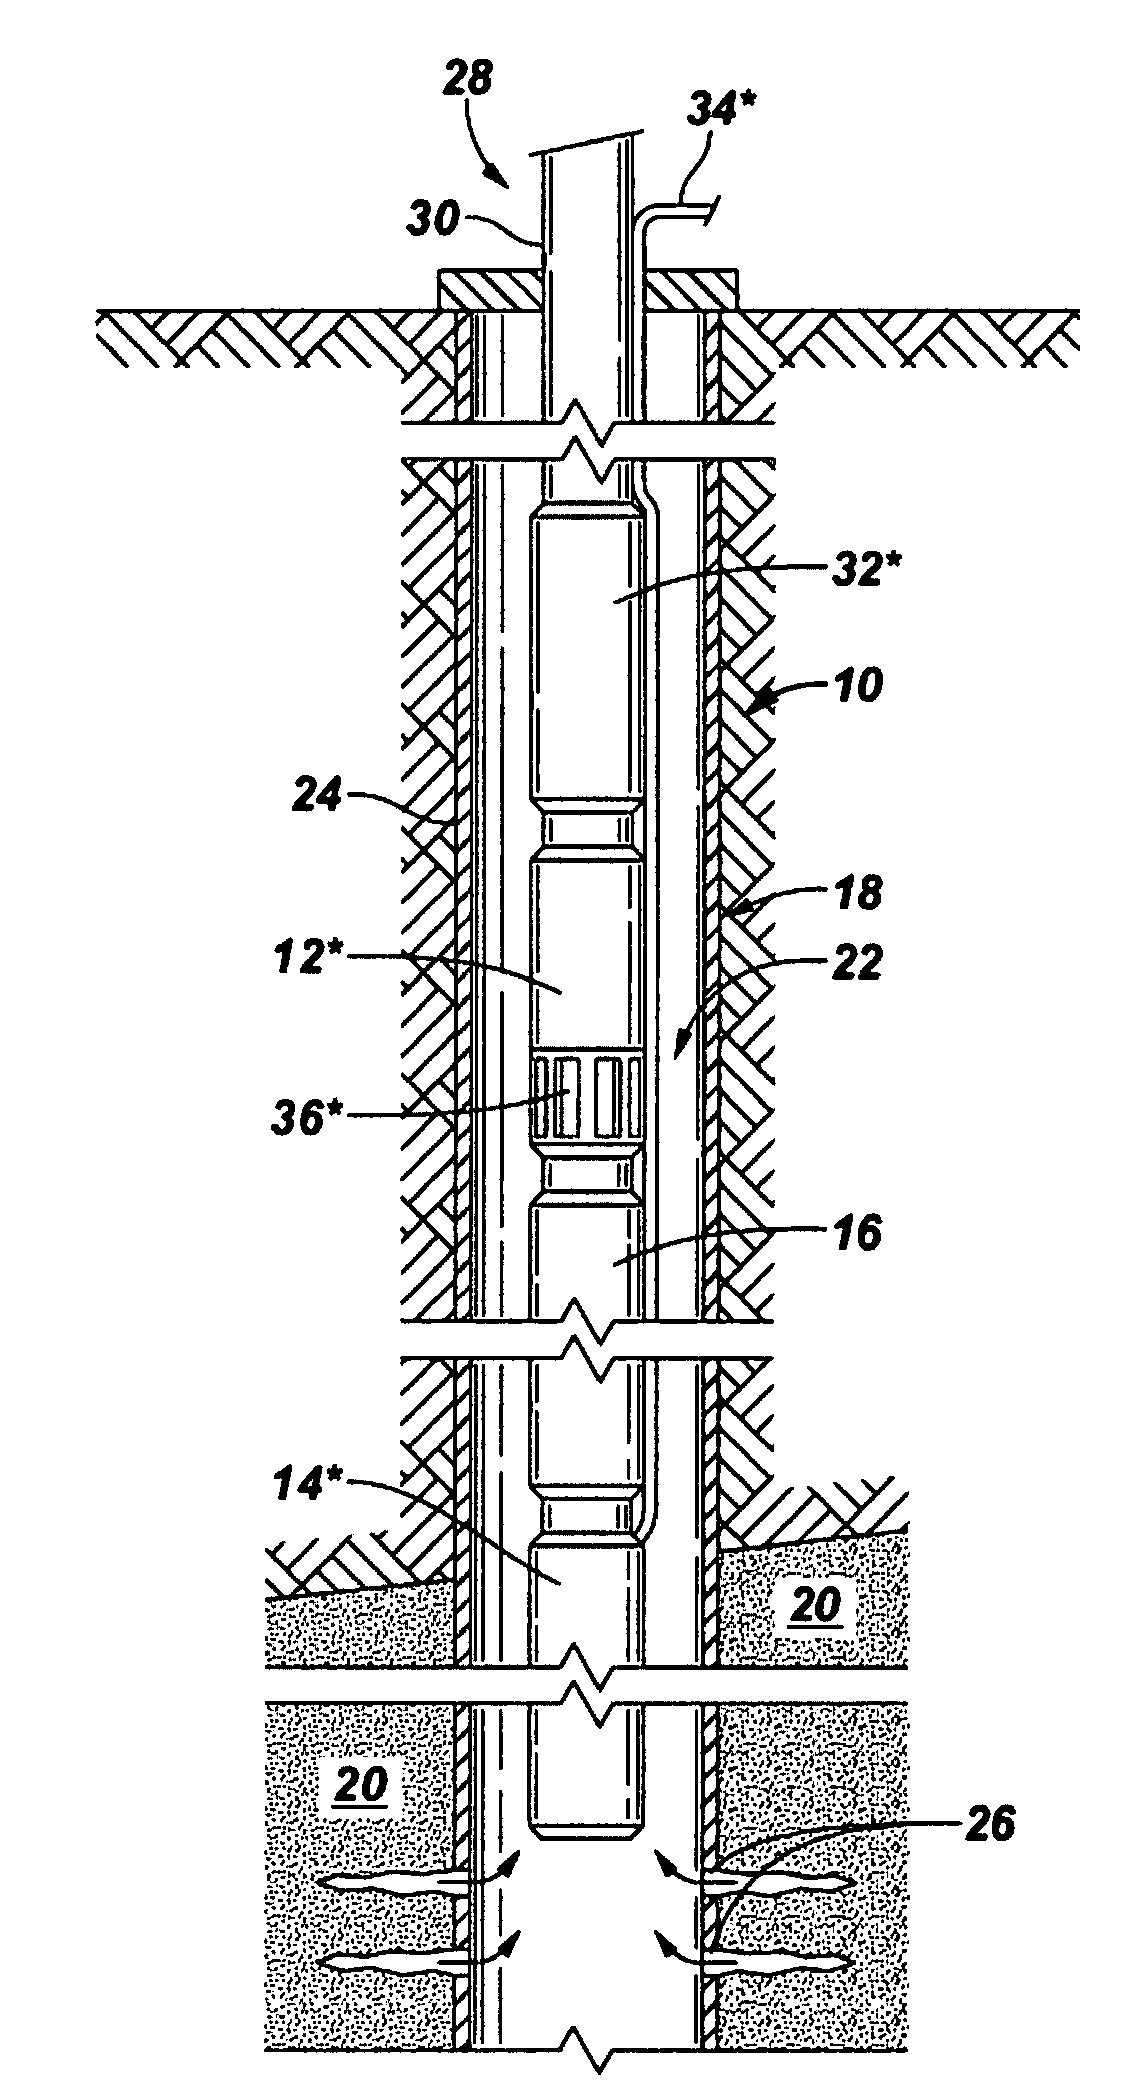 Swellable elastomer-based apparatus, oilfield elements comprising same, and methods of using same in oilfield applications